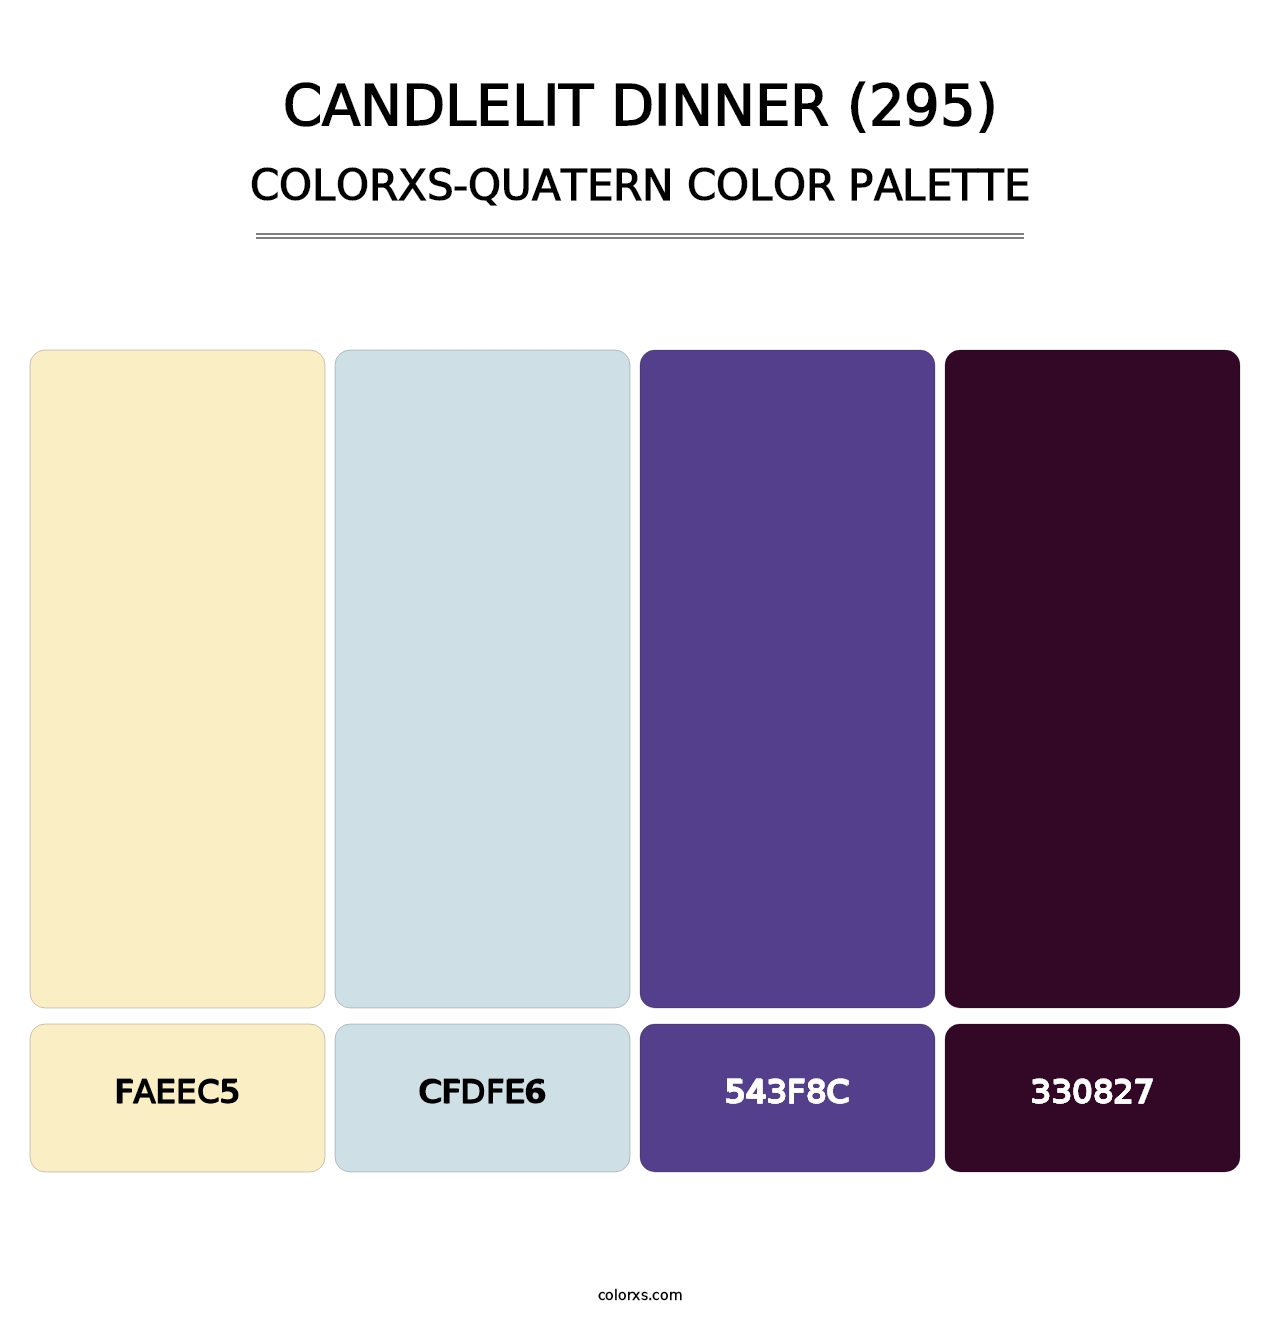 Candlelit Dinner (295) - Colorxs Quatern Palette